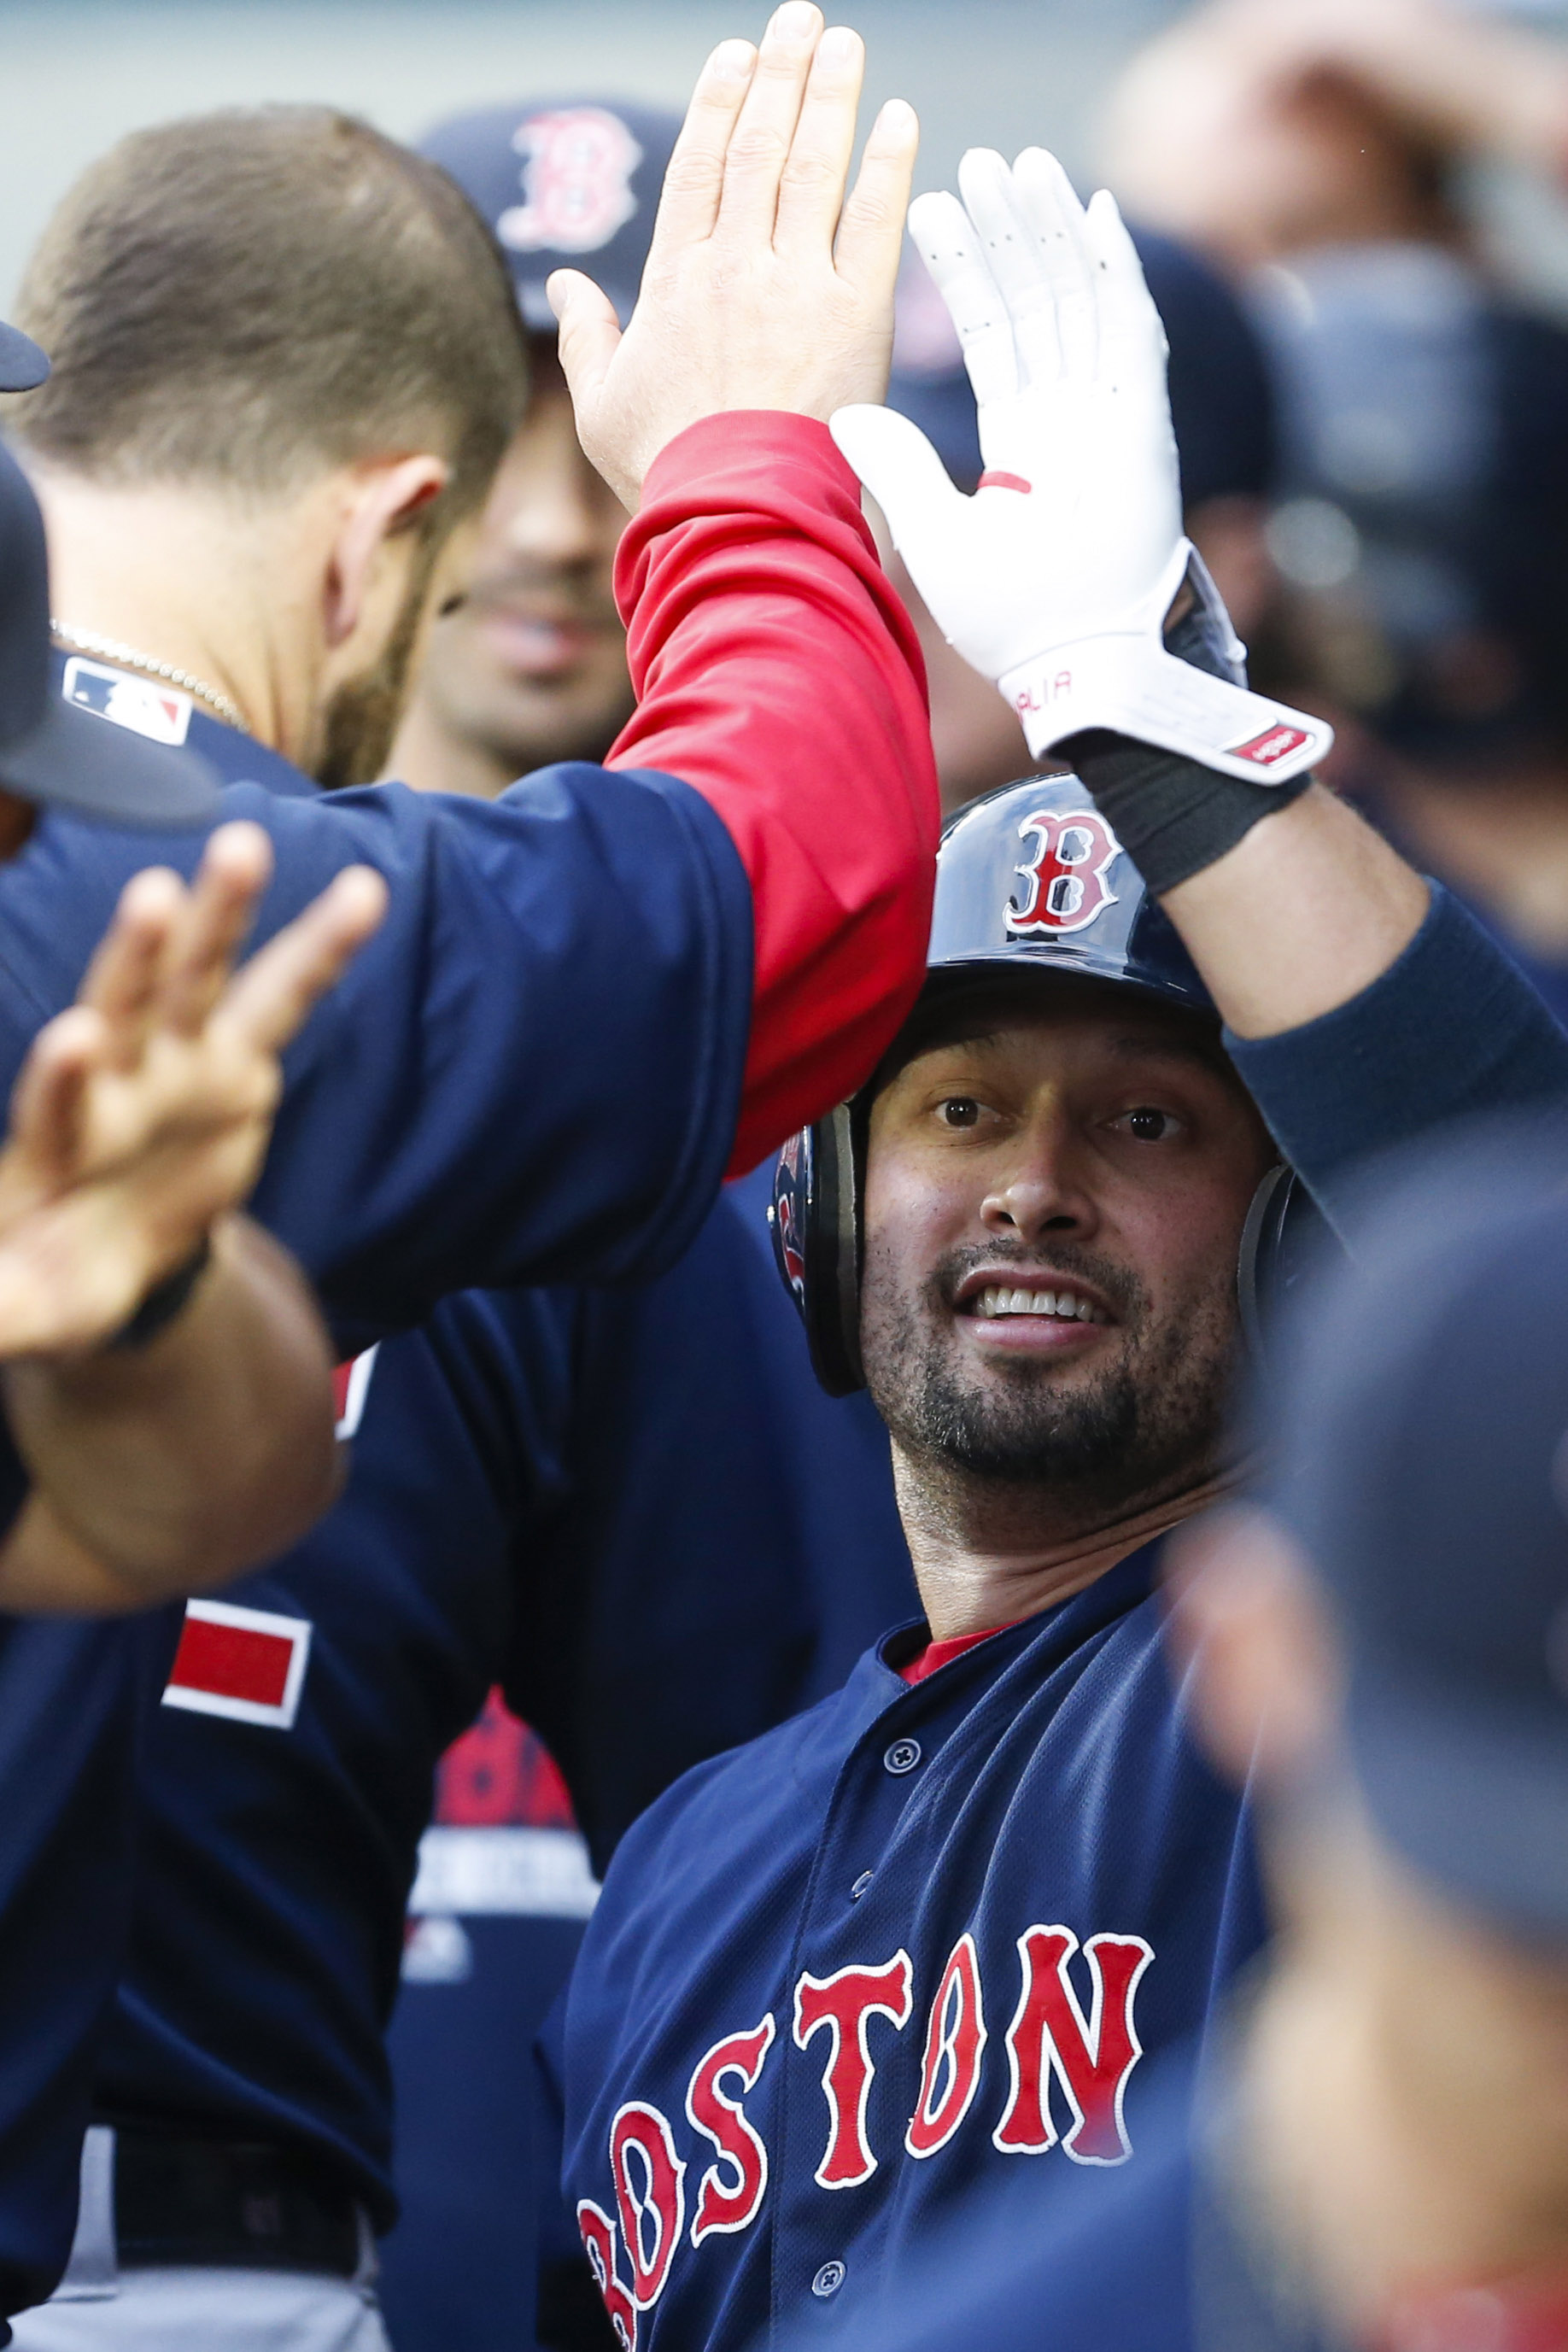 Boston Red Sox OF Shane Victorino says he thinks he should start